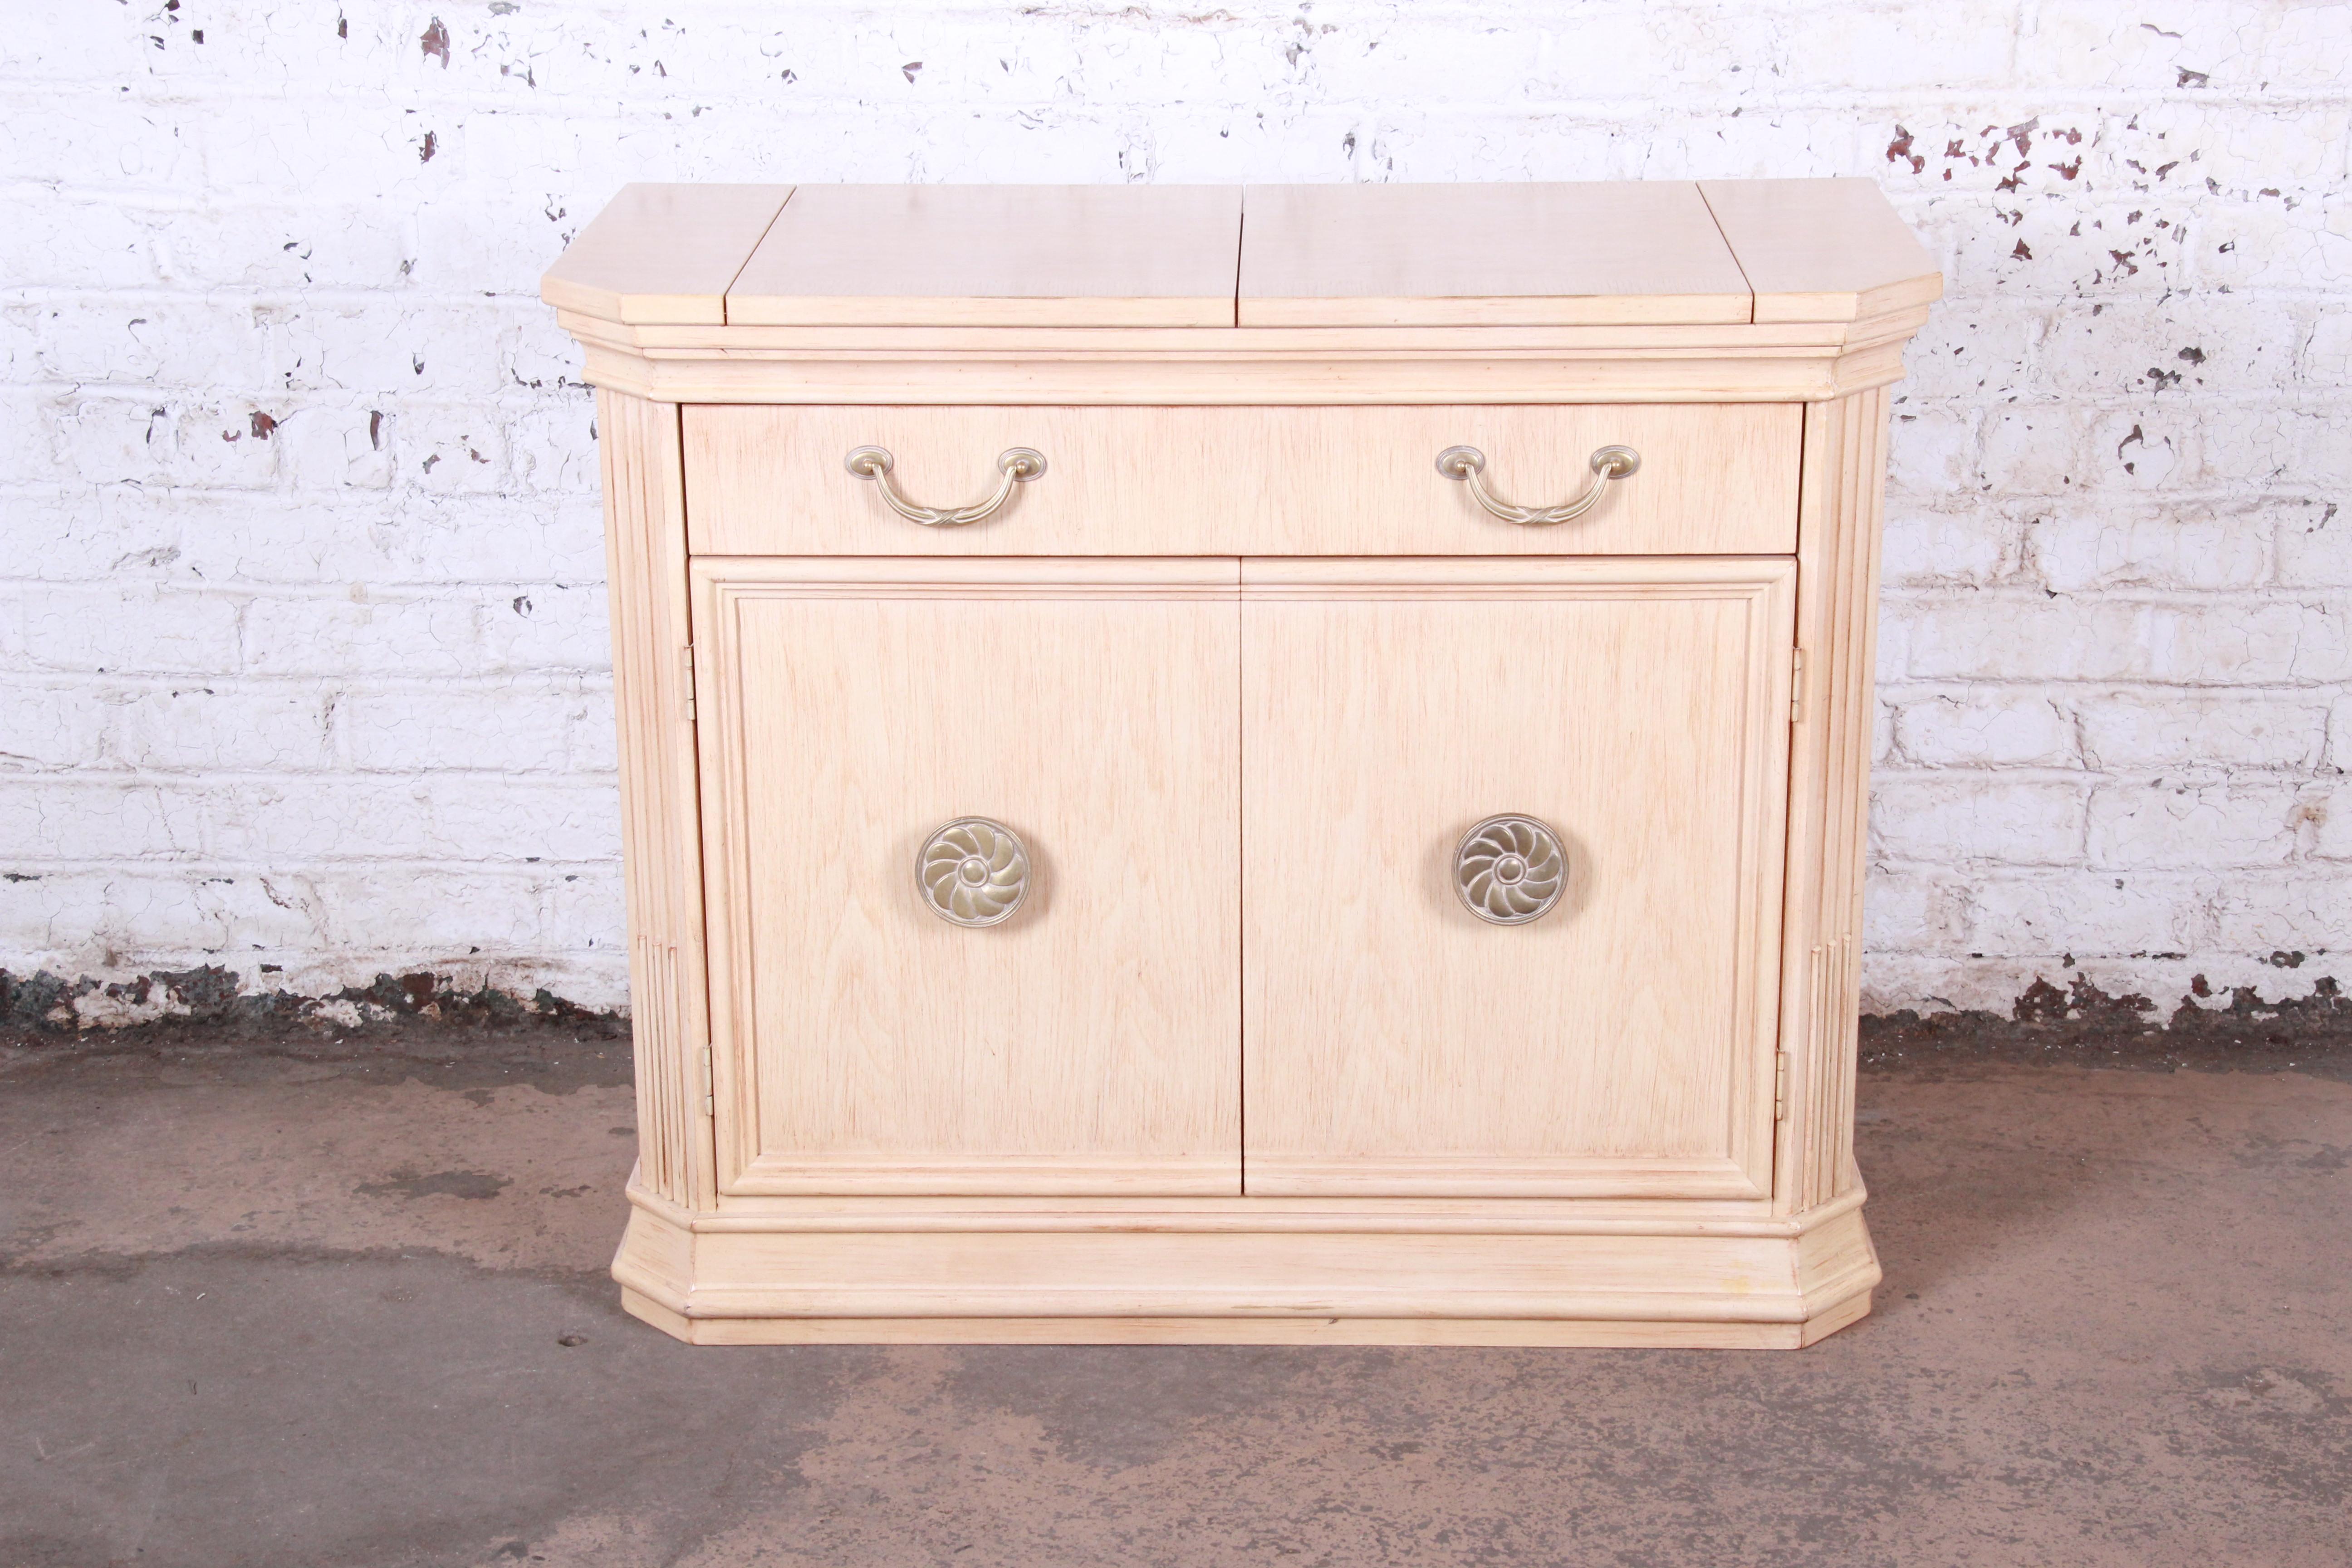 Mediterranean style maple sideboard buffet or bar server

Made by Bernhardt Furniture

USA, 1990s

Measures: 45.38